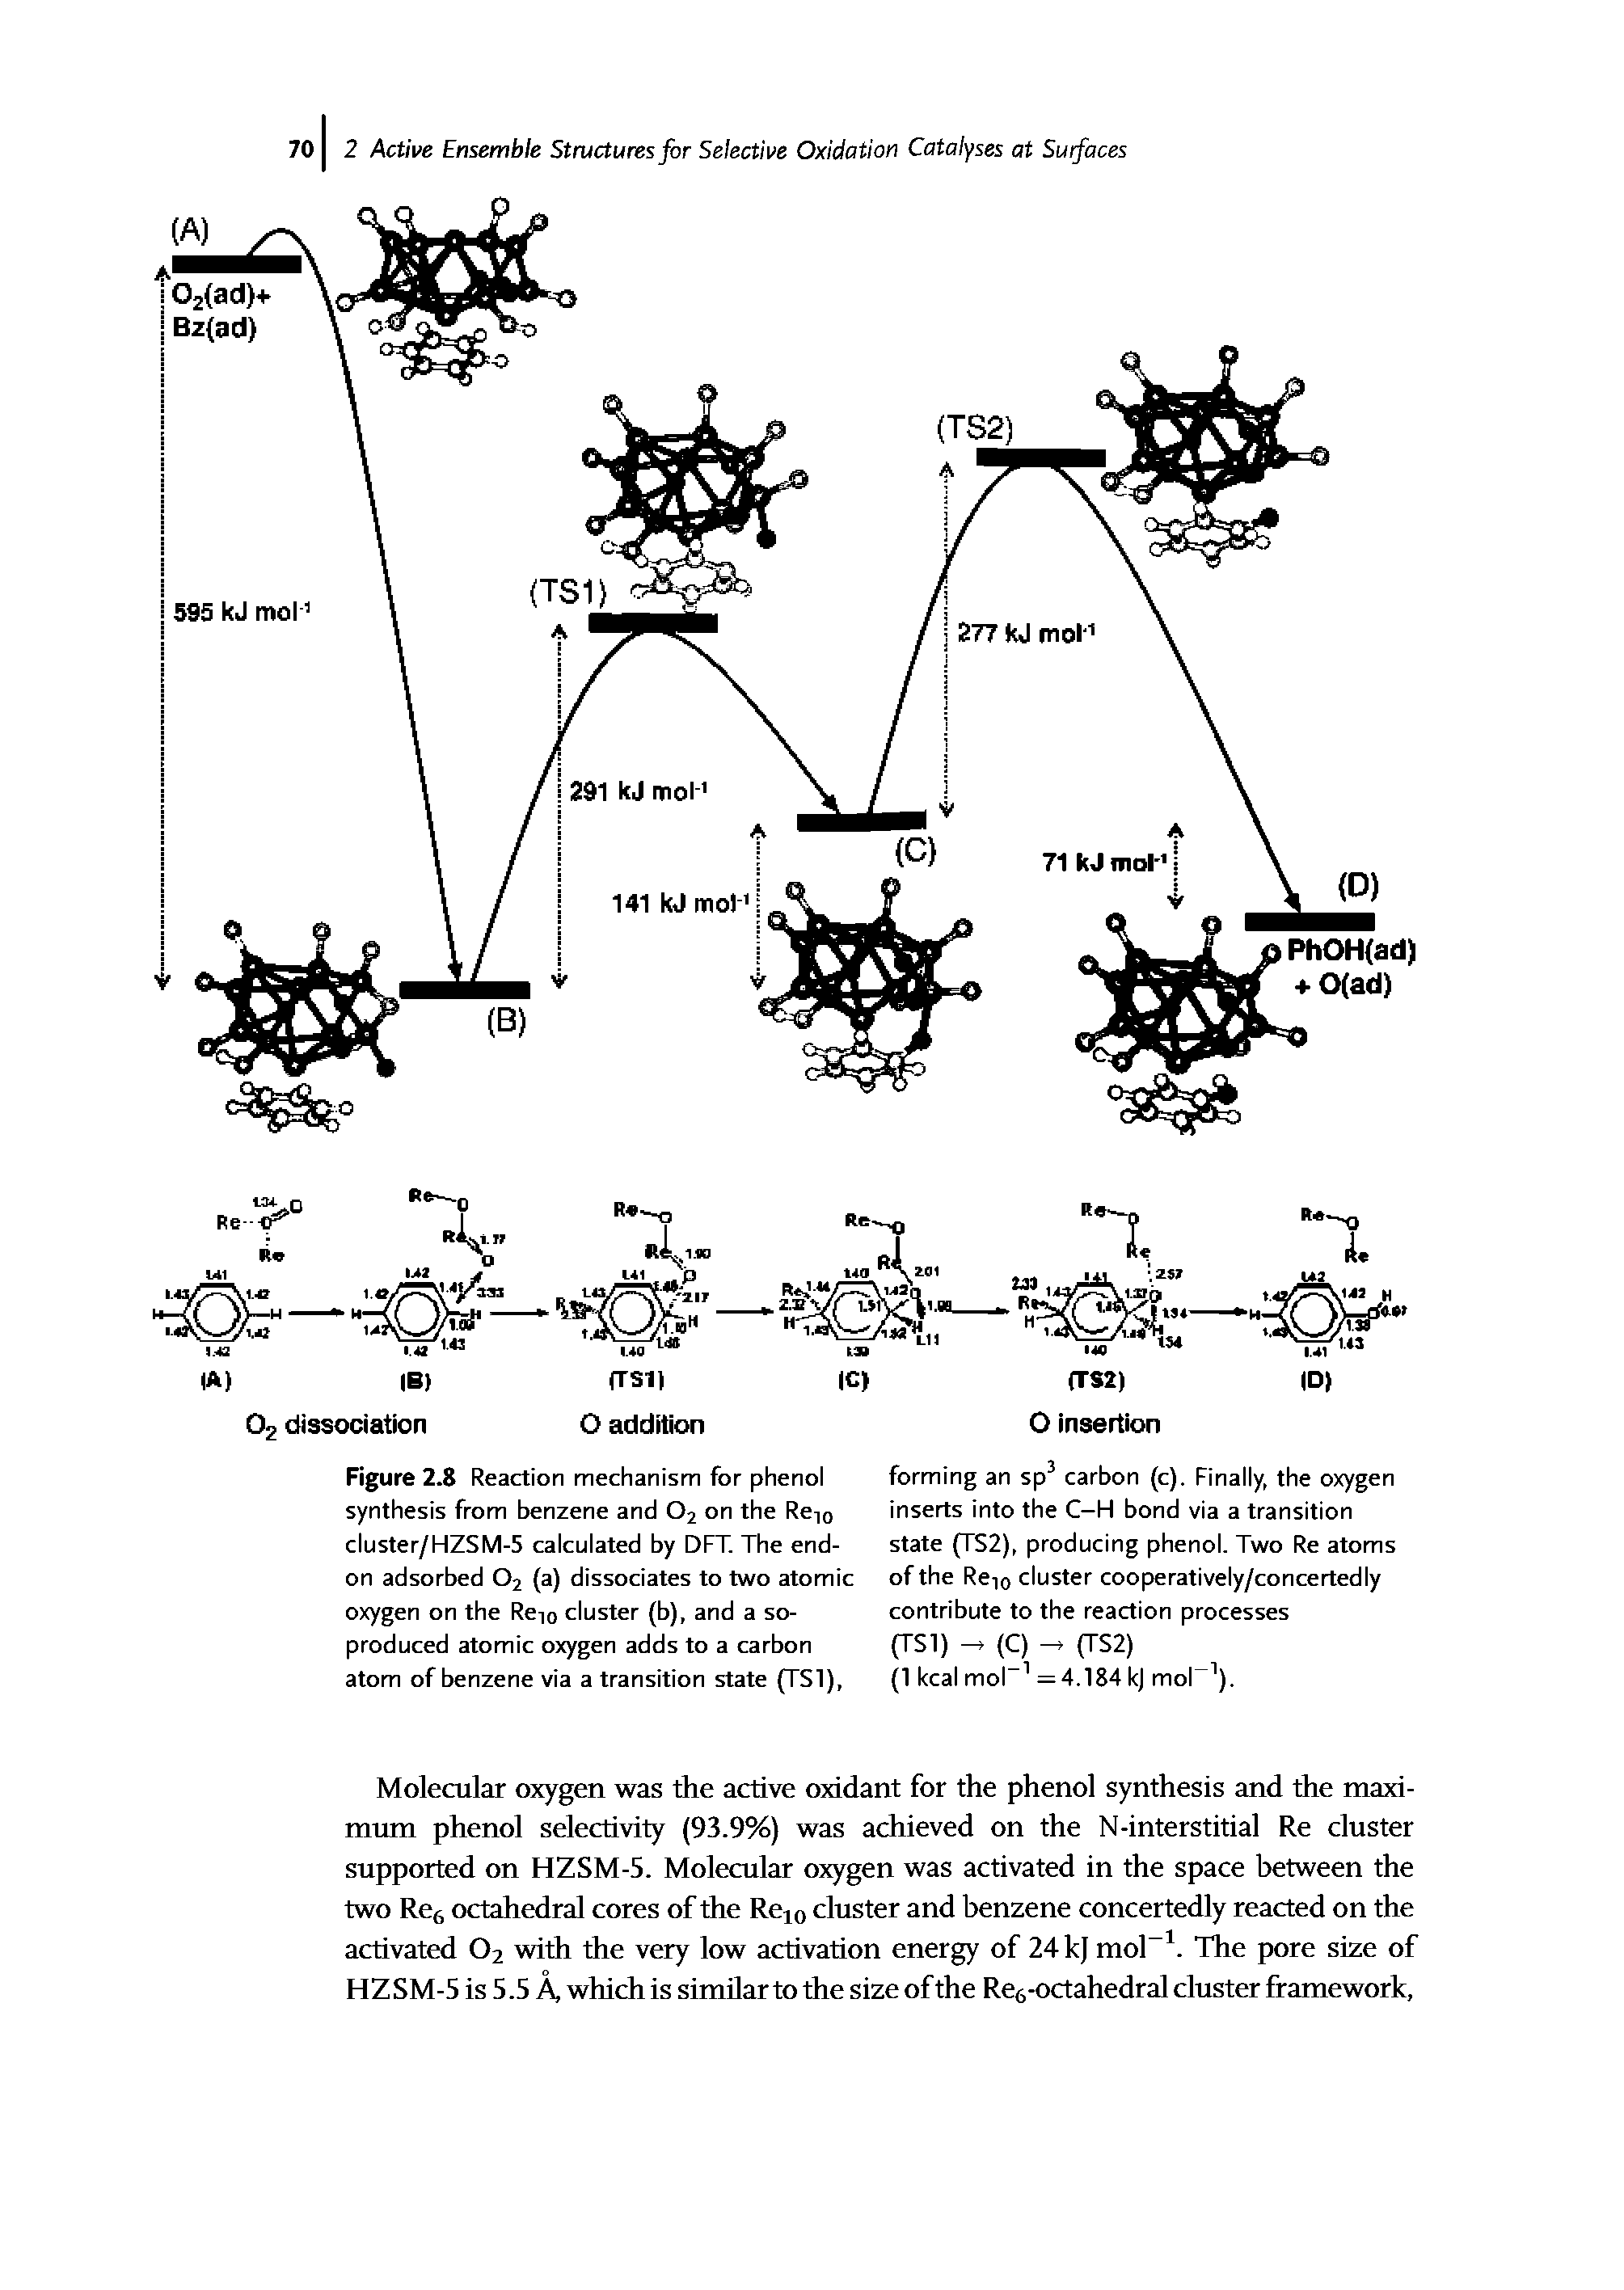 Figure 2.8 Reaction mechanism for phenol synthesis from benzene and 02 on the Re10 cluster/HZSM-5 calculated by DFT. The end-on adsorbed 02 (a) dissociates to two atomic oxygen on the Re10 cluster (b), and a so-produced atomic oxygen adds to a carbon atom of benzene via a transition state (TS1),...